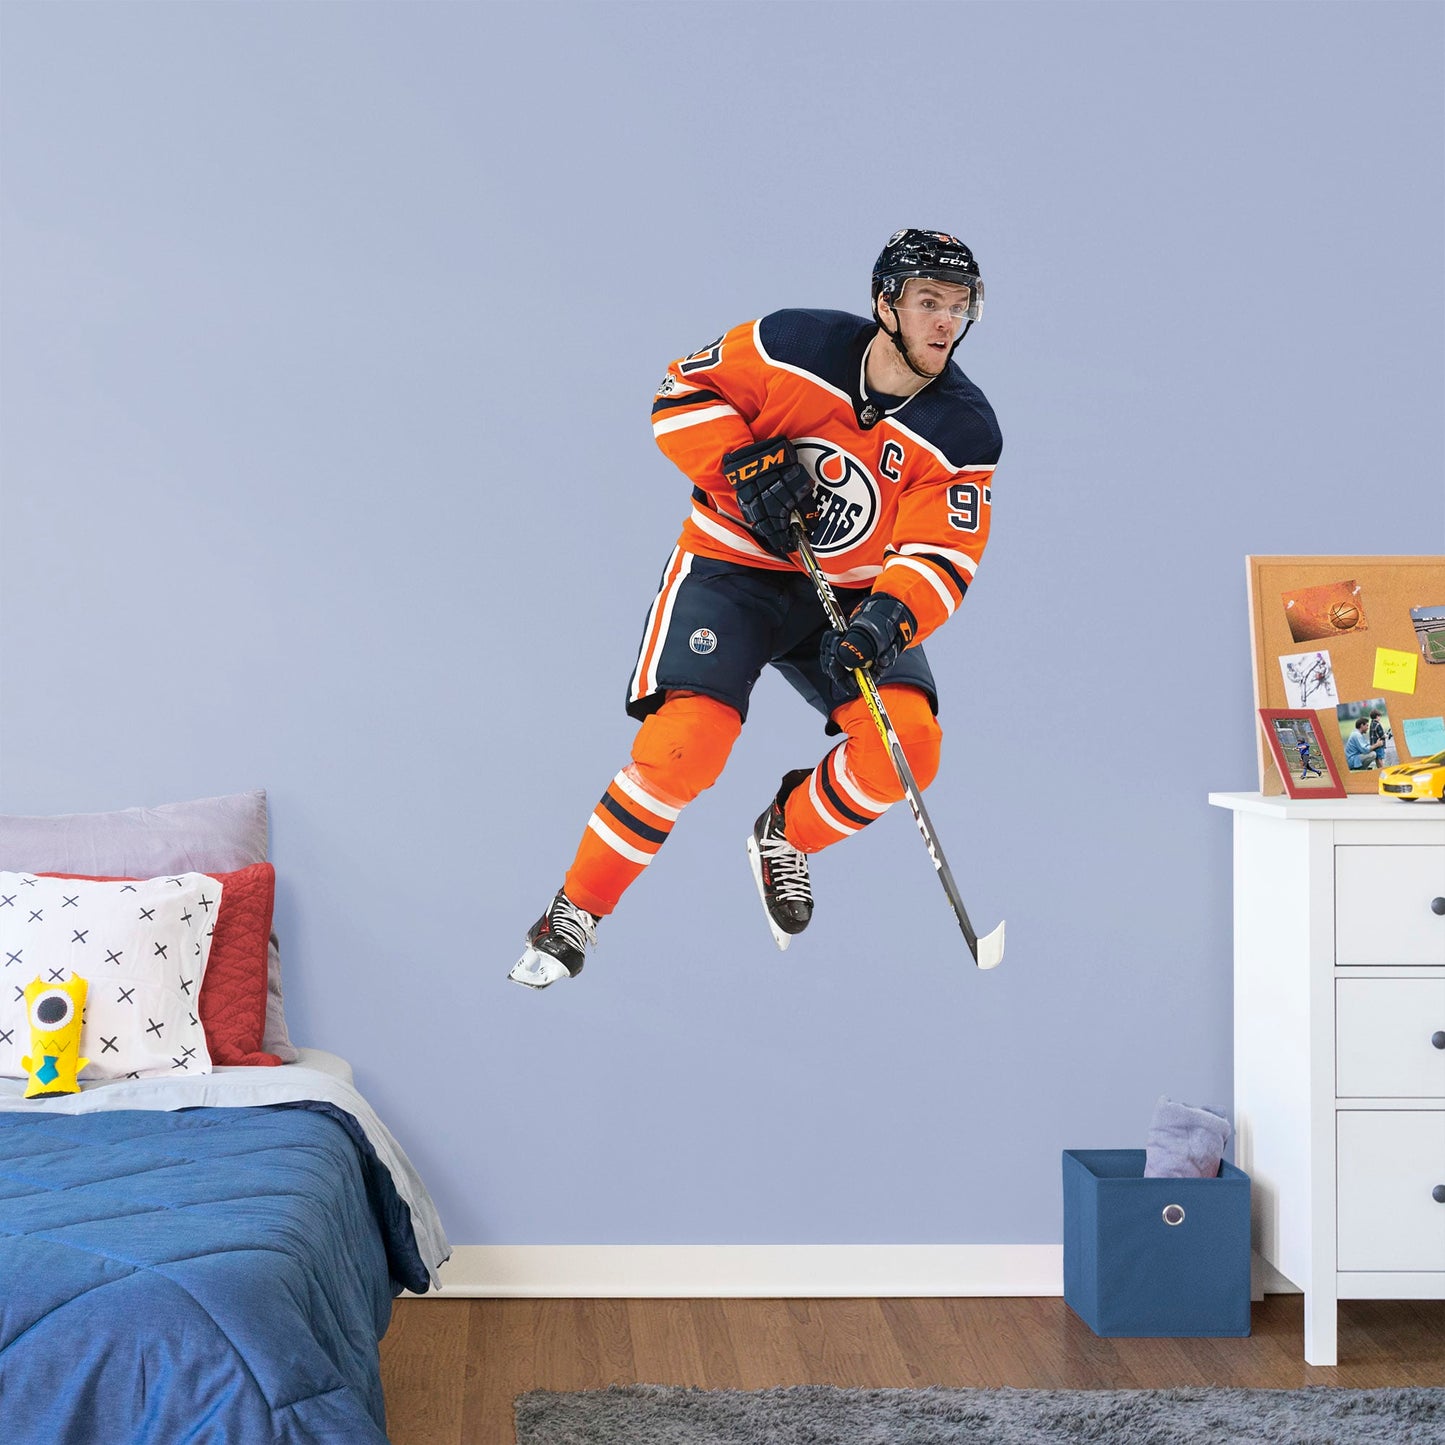 Giant Athlete + 2 Decals (33"W x 51"H) Prep to rep team captain McDavid and the Edmonton Oilers to another championship with this quality reusable logo collection. Nicknamed "McJesus" for his skill, this 1st overall 2015 NHL draft pick has scored many awards including the Hart Memorial Trophy. You'll be singing, "Oh, Canada," along with the team at Rogers Place when you post this durable logo in the home, office, or man-cave. O, Canada, we stand on guard for thee (and Connor McDavid!).